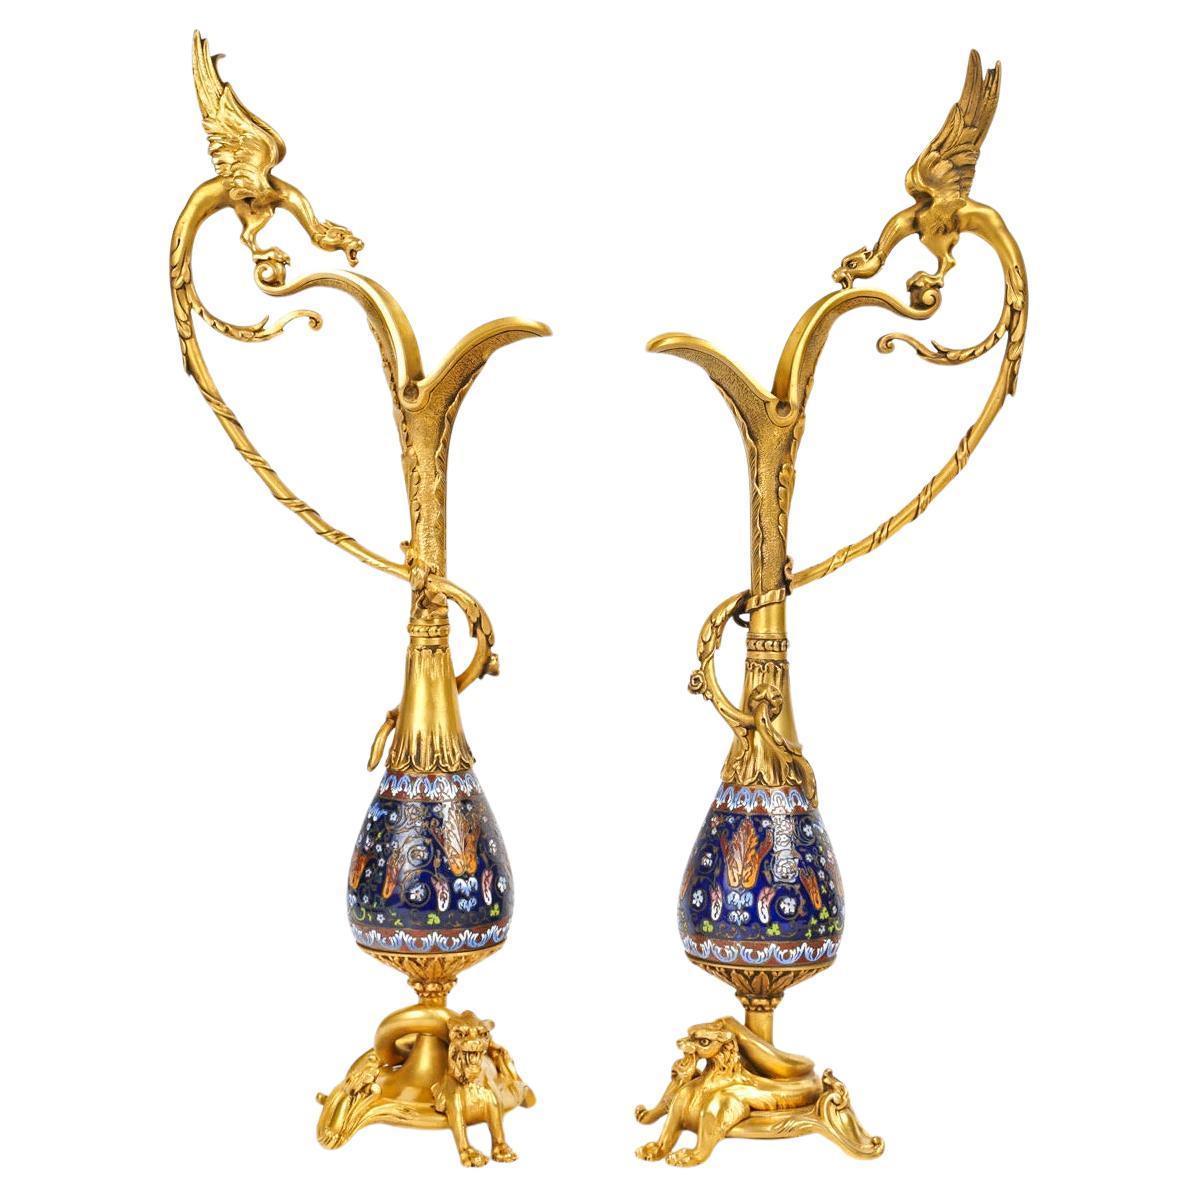 Pair of Ewers in Chased and Gilt Bronze, Neo-Gothic Style, Napoleon III Period.